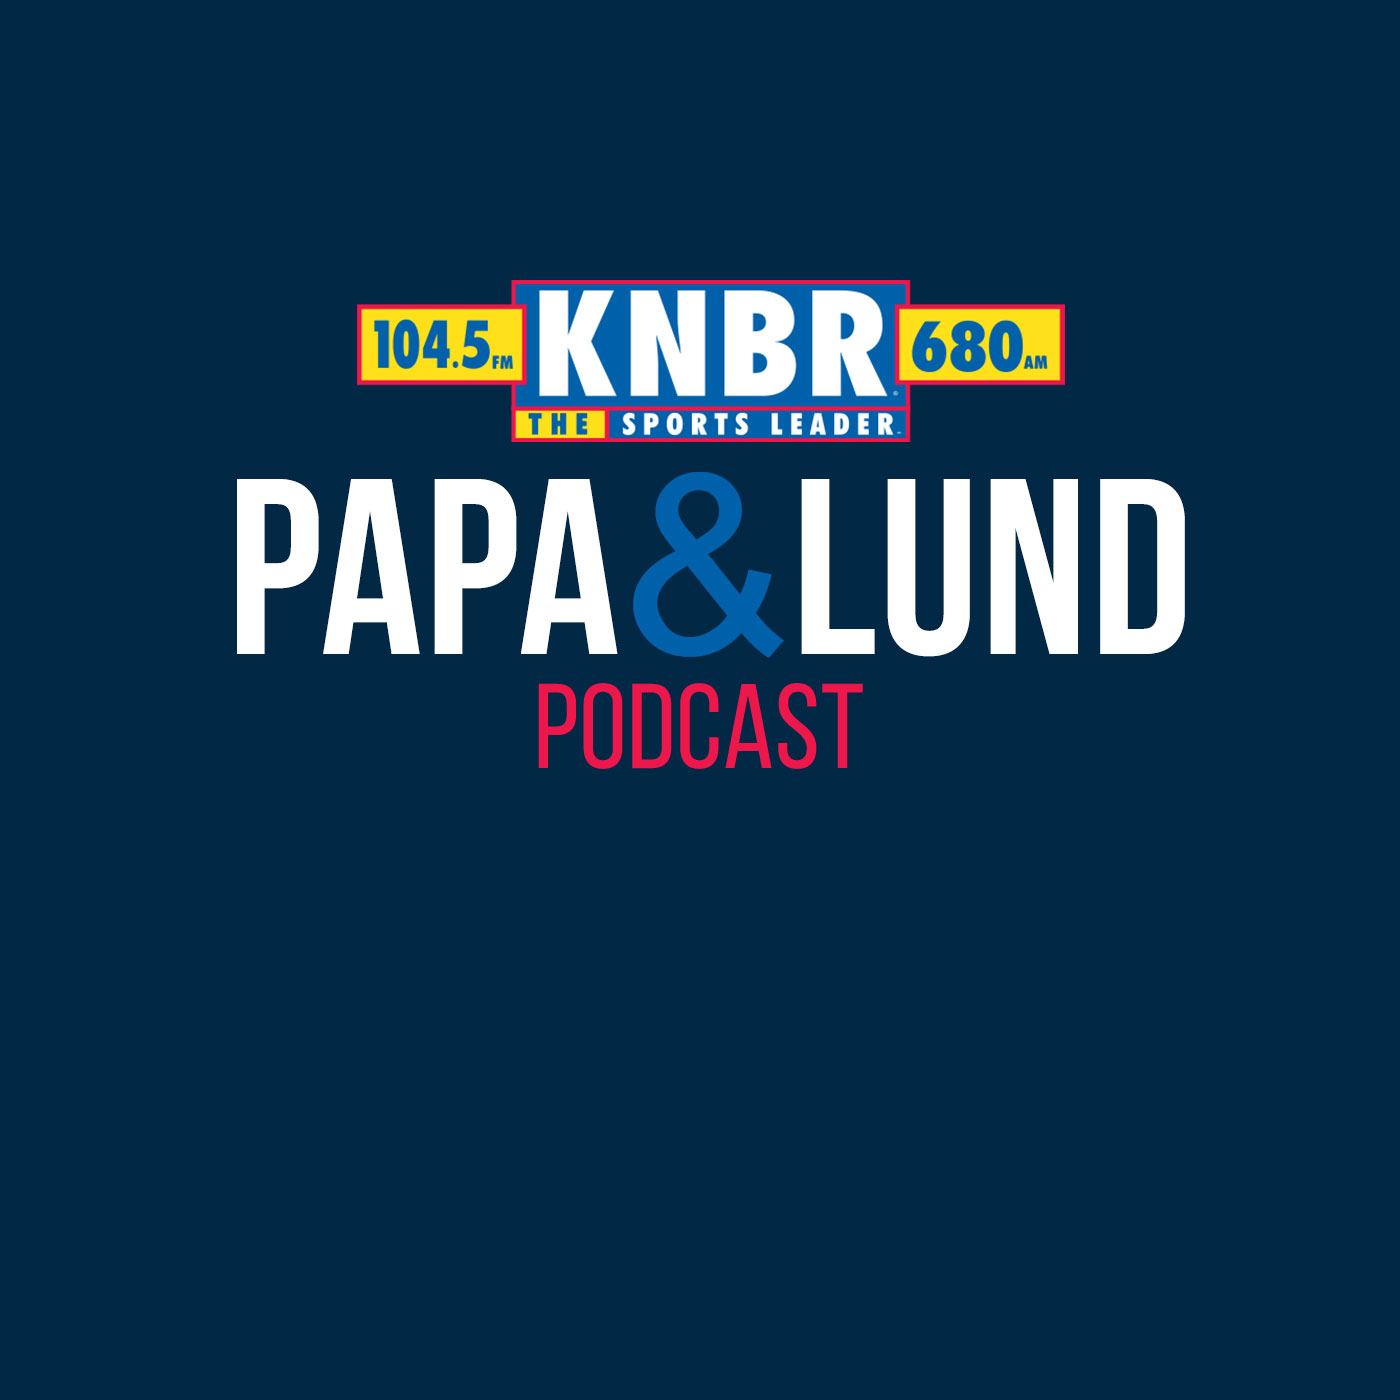 2-29 Andrew Siciliano joins Papa & Lund live from the NFL Combine to discuss future potential stars in the NFL as well as who can potentially fill the 49ers Defensive Coordinator vacancy